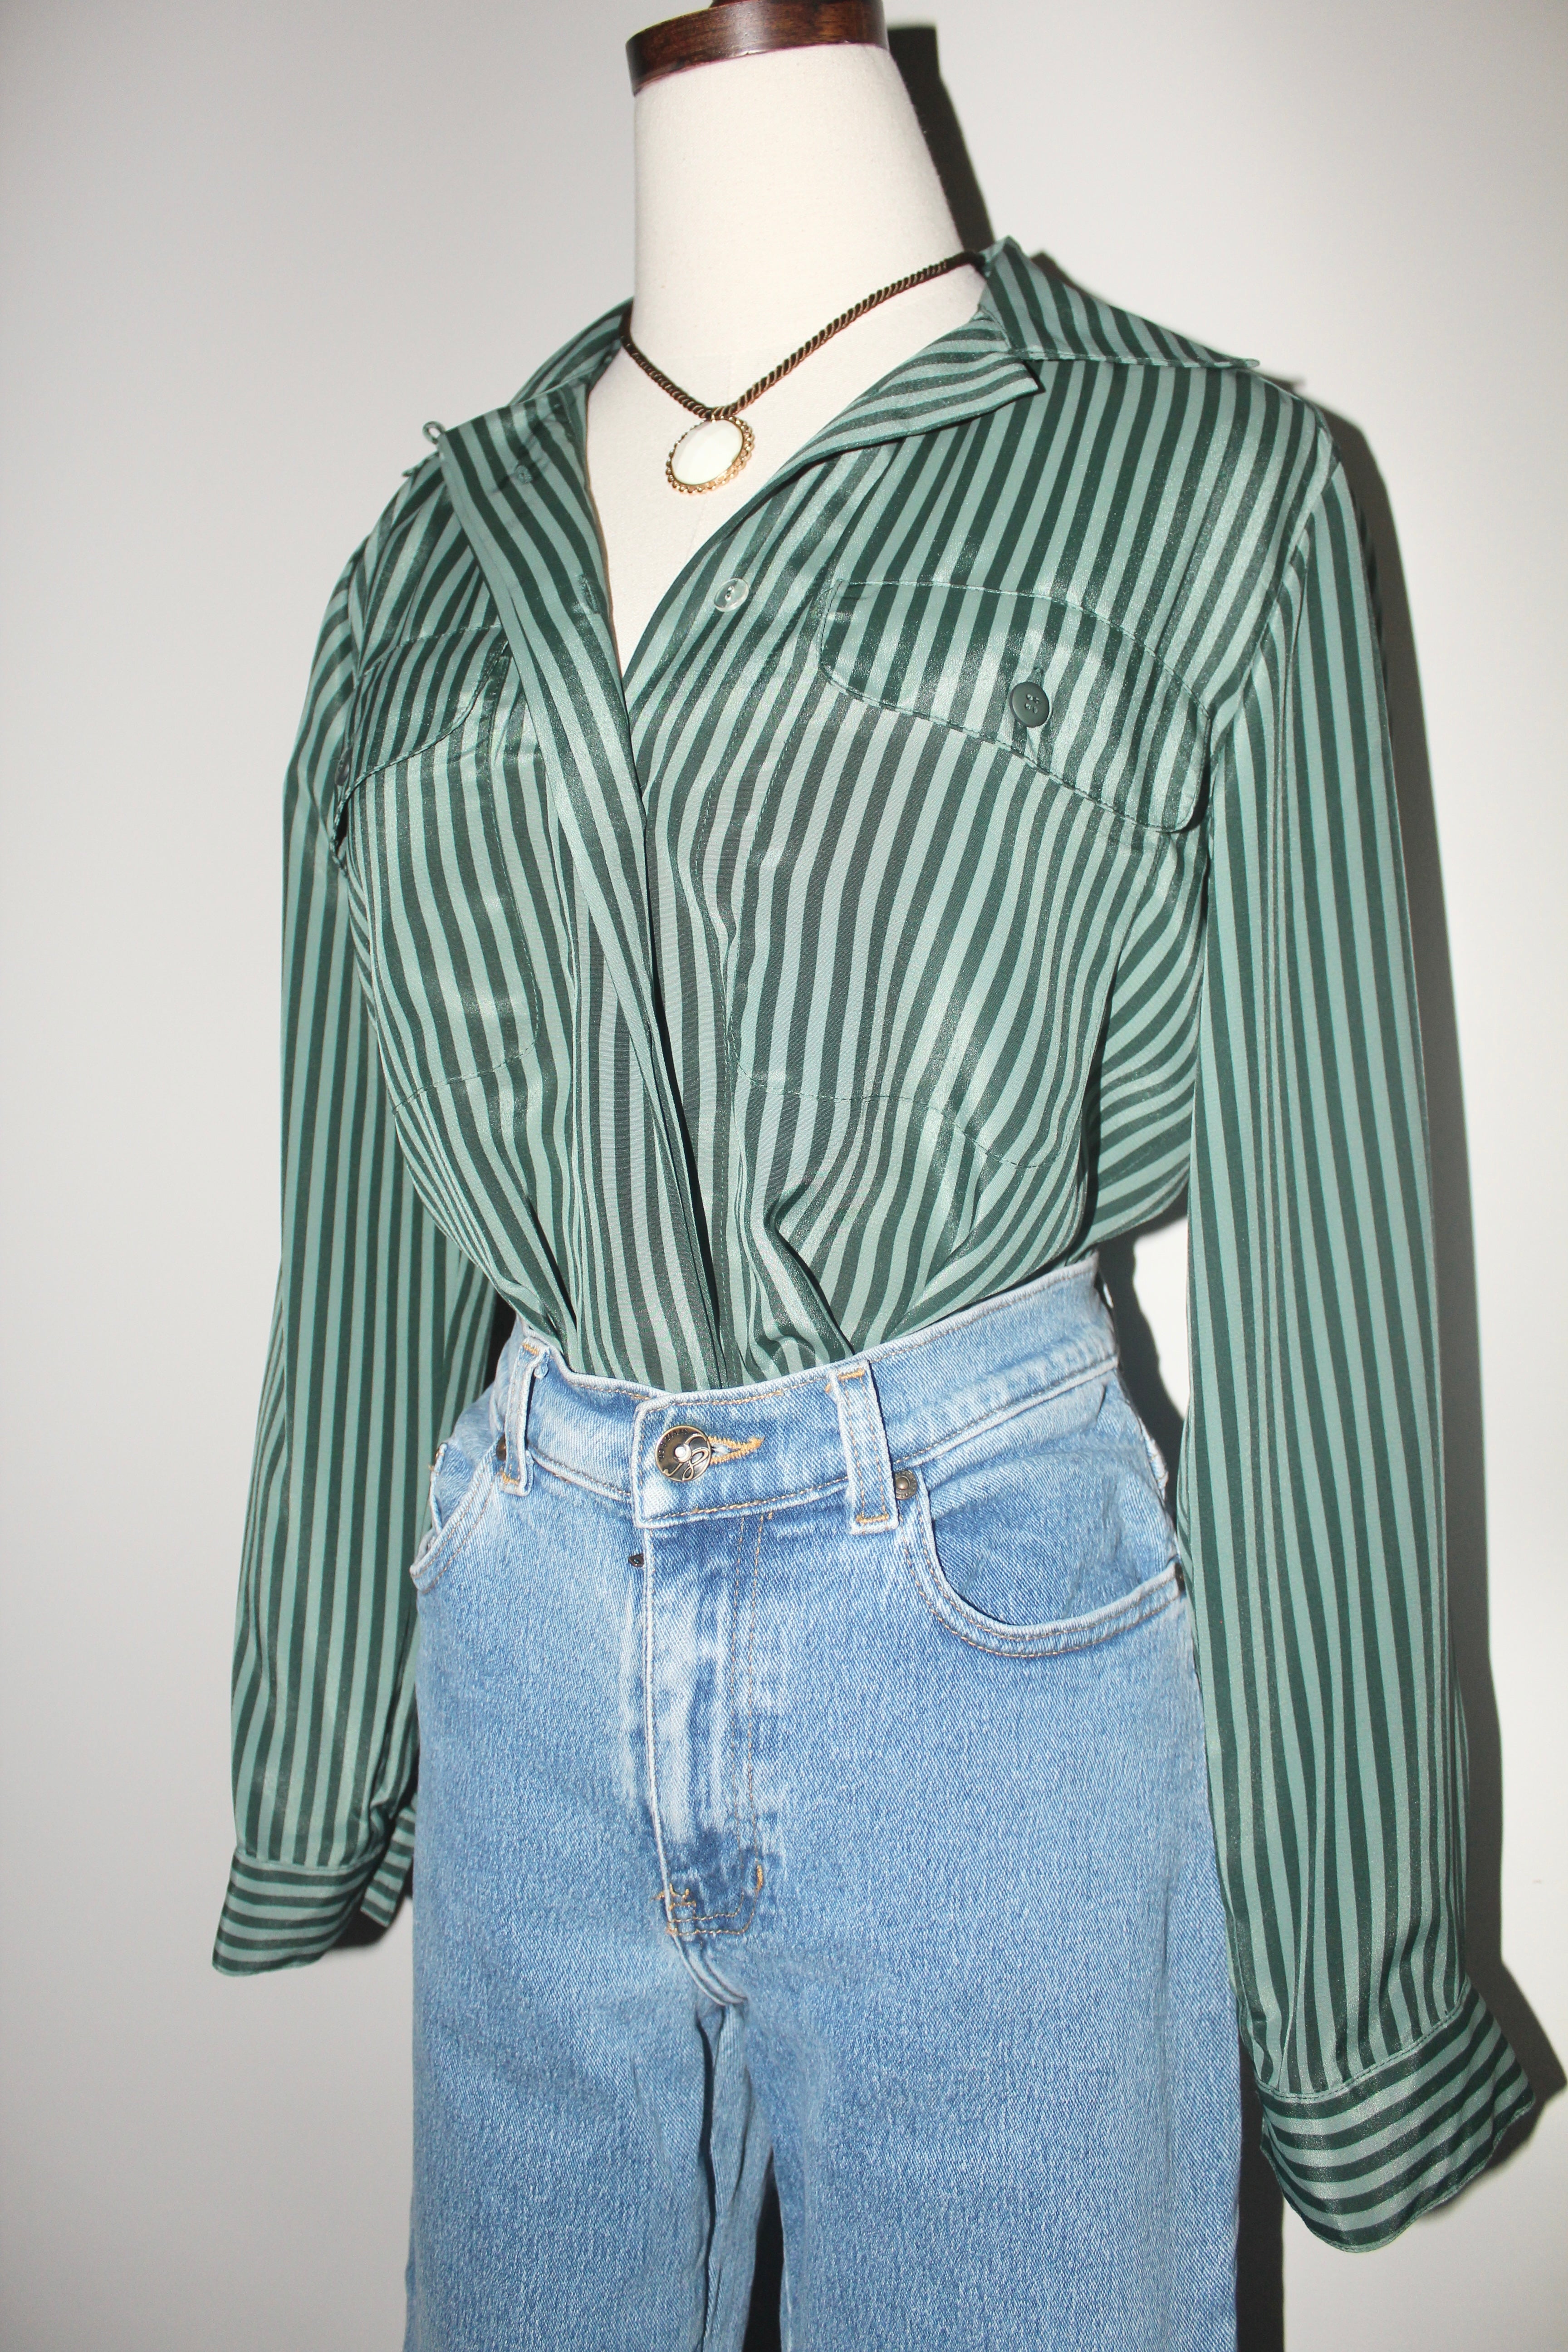 Vintage 90s Green Striped Button Up (M)